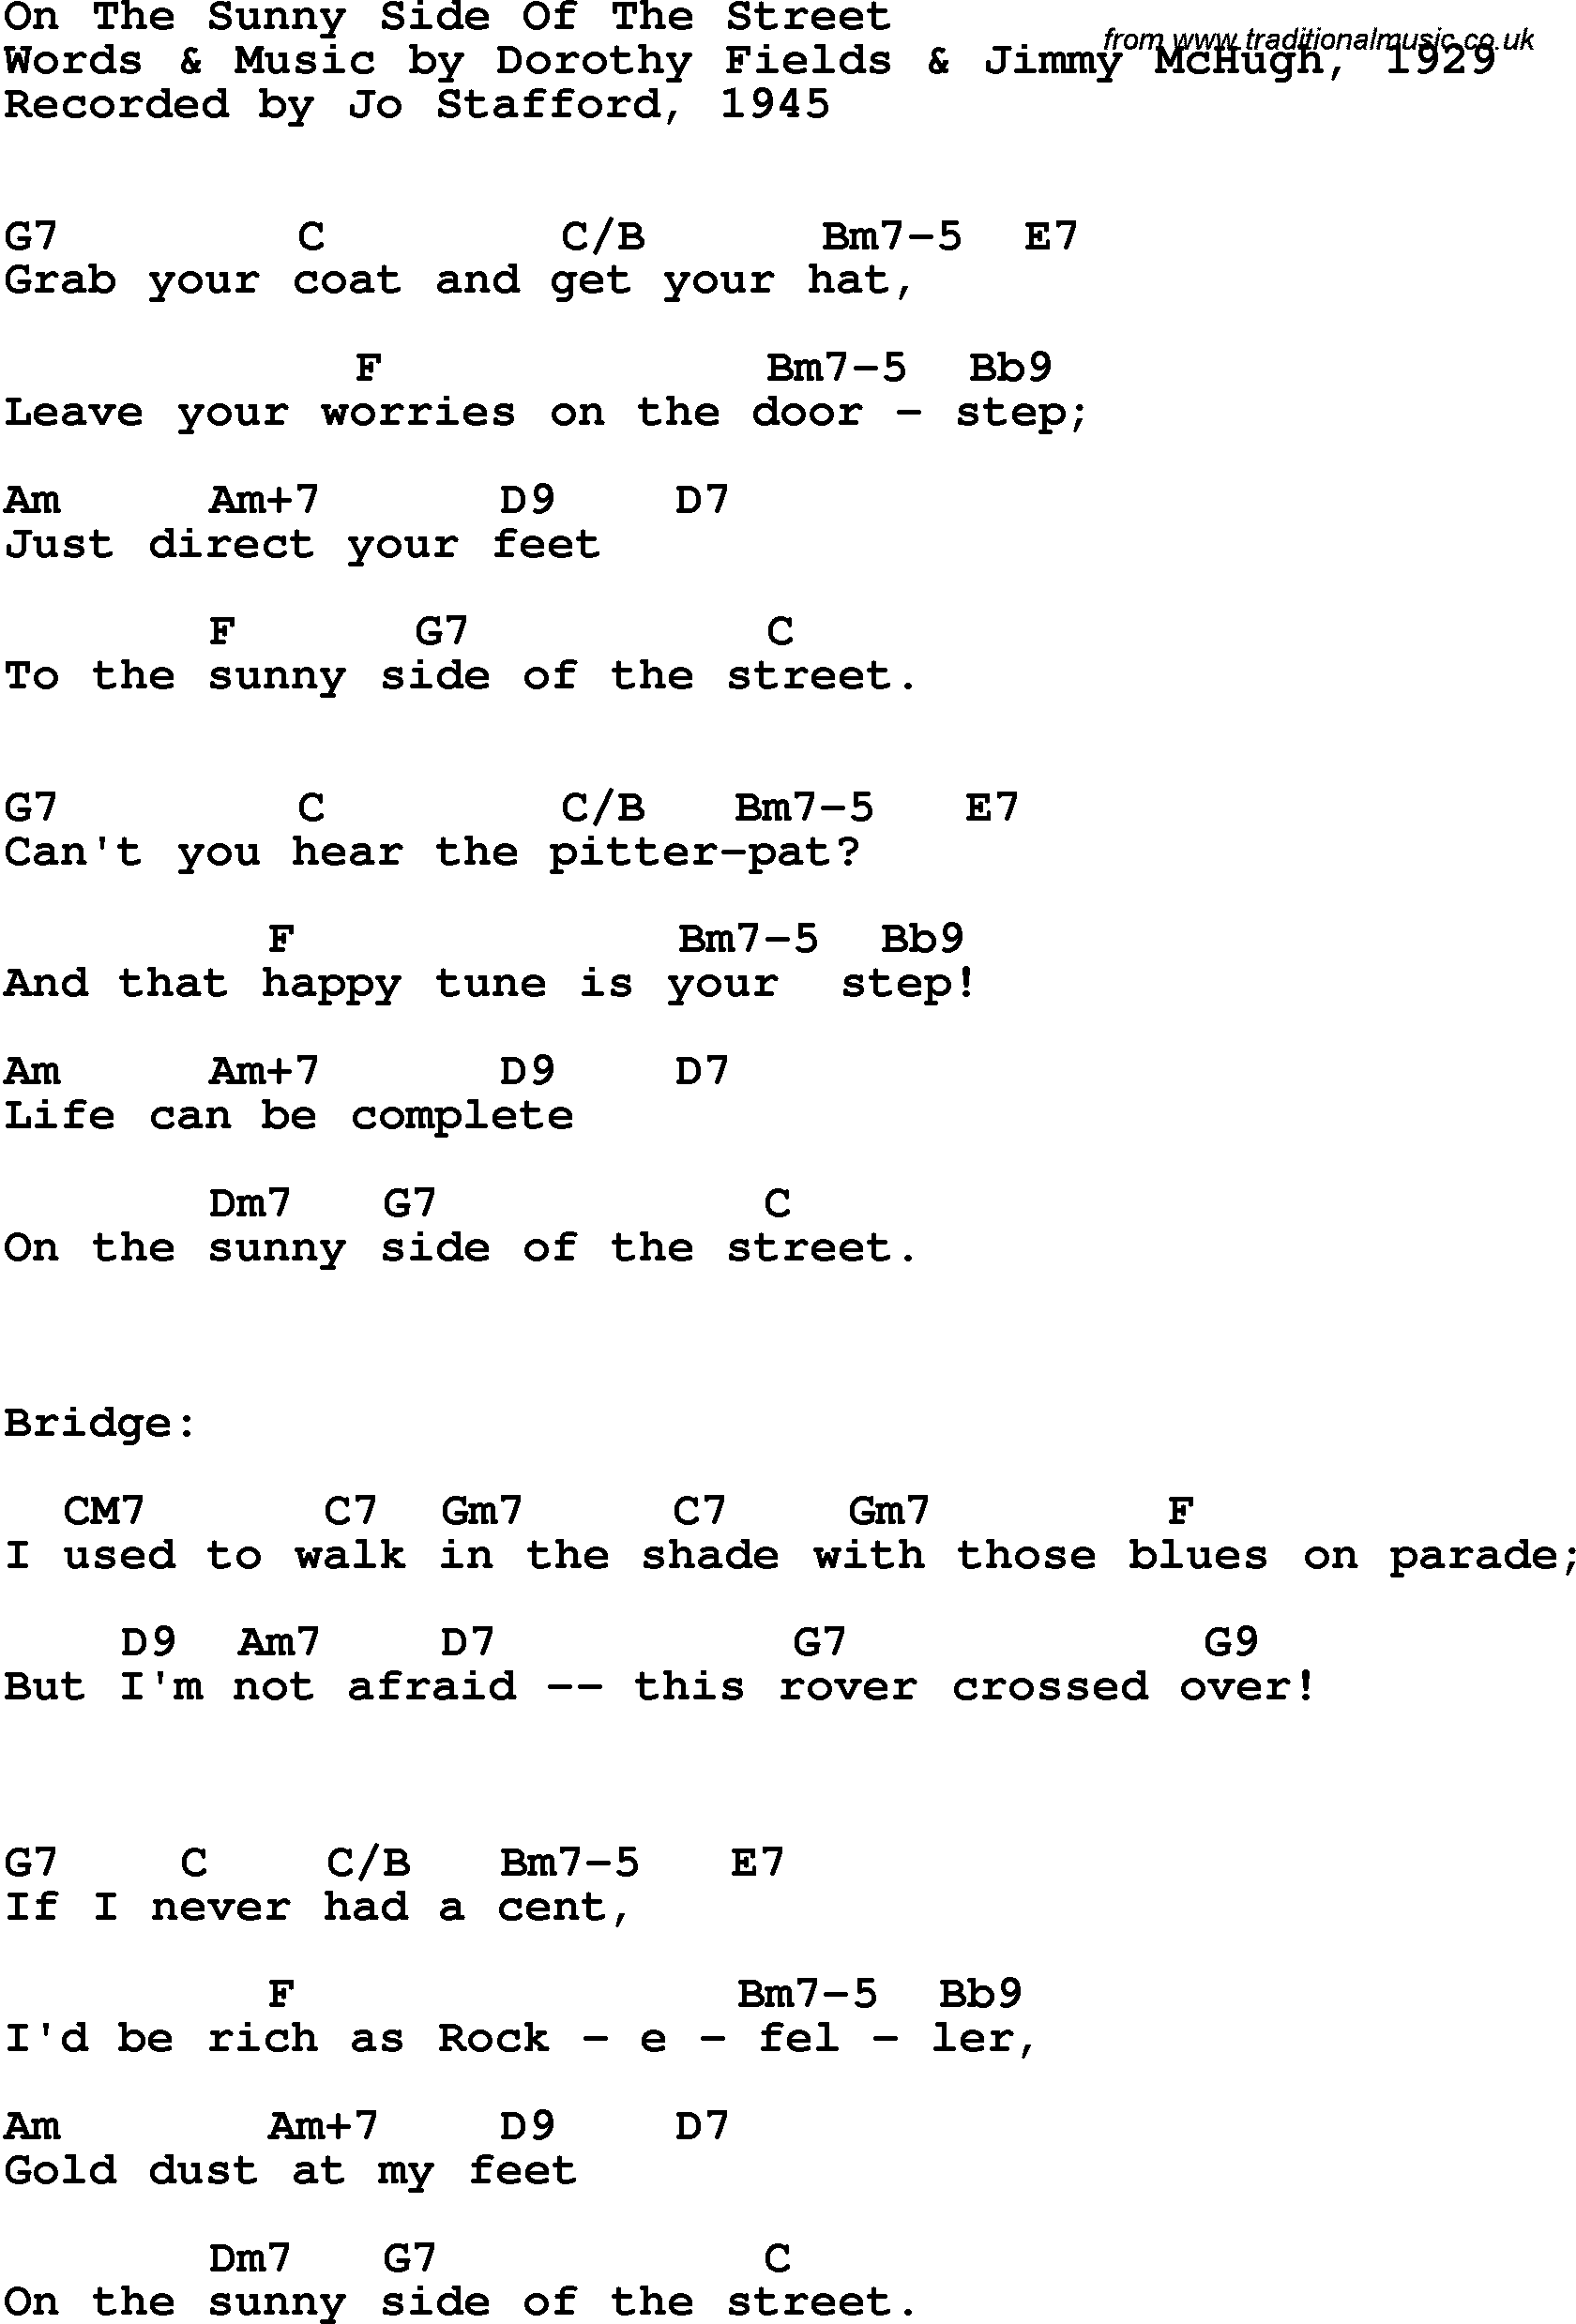 Song Lyrics With Guitar Chords For On The Sunny Side Of The Street